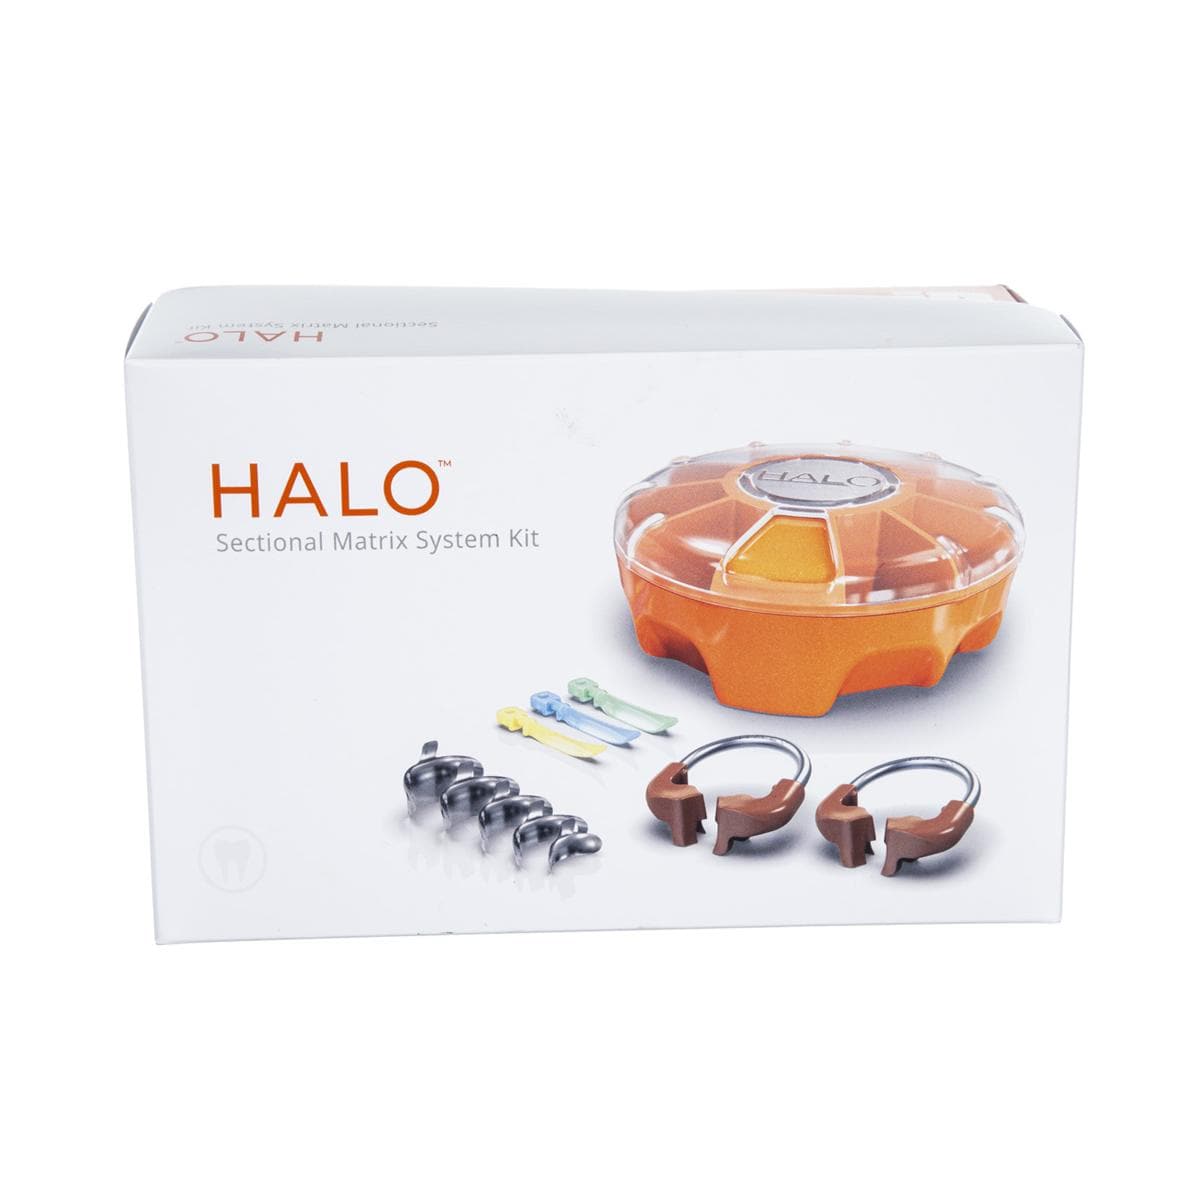 HALO Sectional Matrix Kit - Firm Bands, no instruments